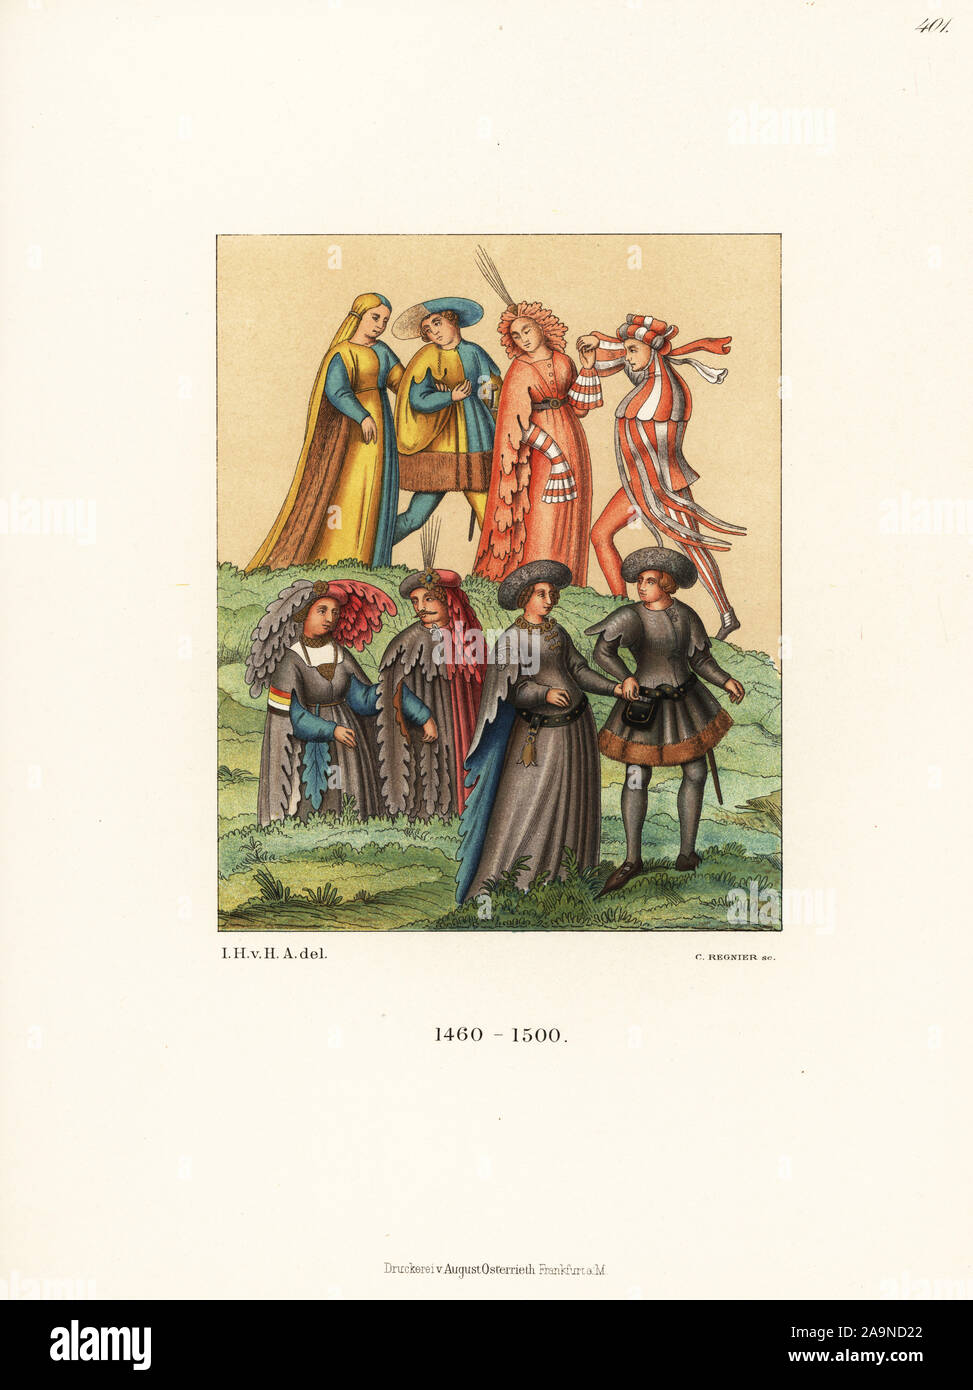 German fashions of the late 15th century from Matthaus Schwarz’s Book of Clothes, Trachtenbuch. Chromolithograph from Hefner-Alteneck's Costumes, Artworks and Appliances from the Middle Ages to the 17th Century, Frankfurt, 1889. Illustration by Dr. Jakob Heinrich von Hefner-Alteneck, lithographed by C. Regnier. Dr. Hefner-Alteneck (1811 - 1903) was a German museum curator, archaeologist, art historian, illustrator and etcher. Stock Photo